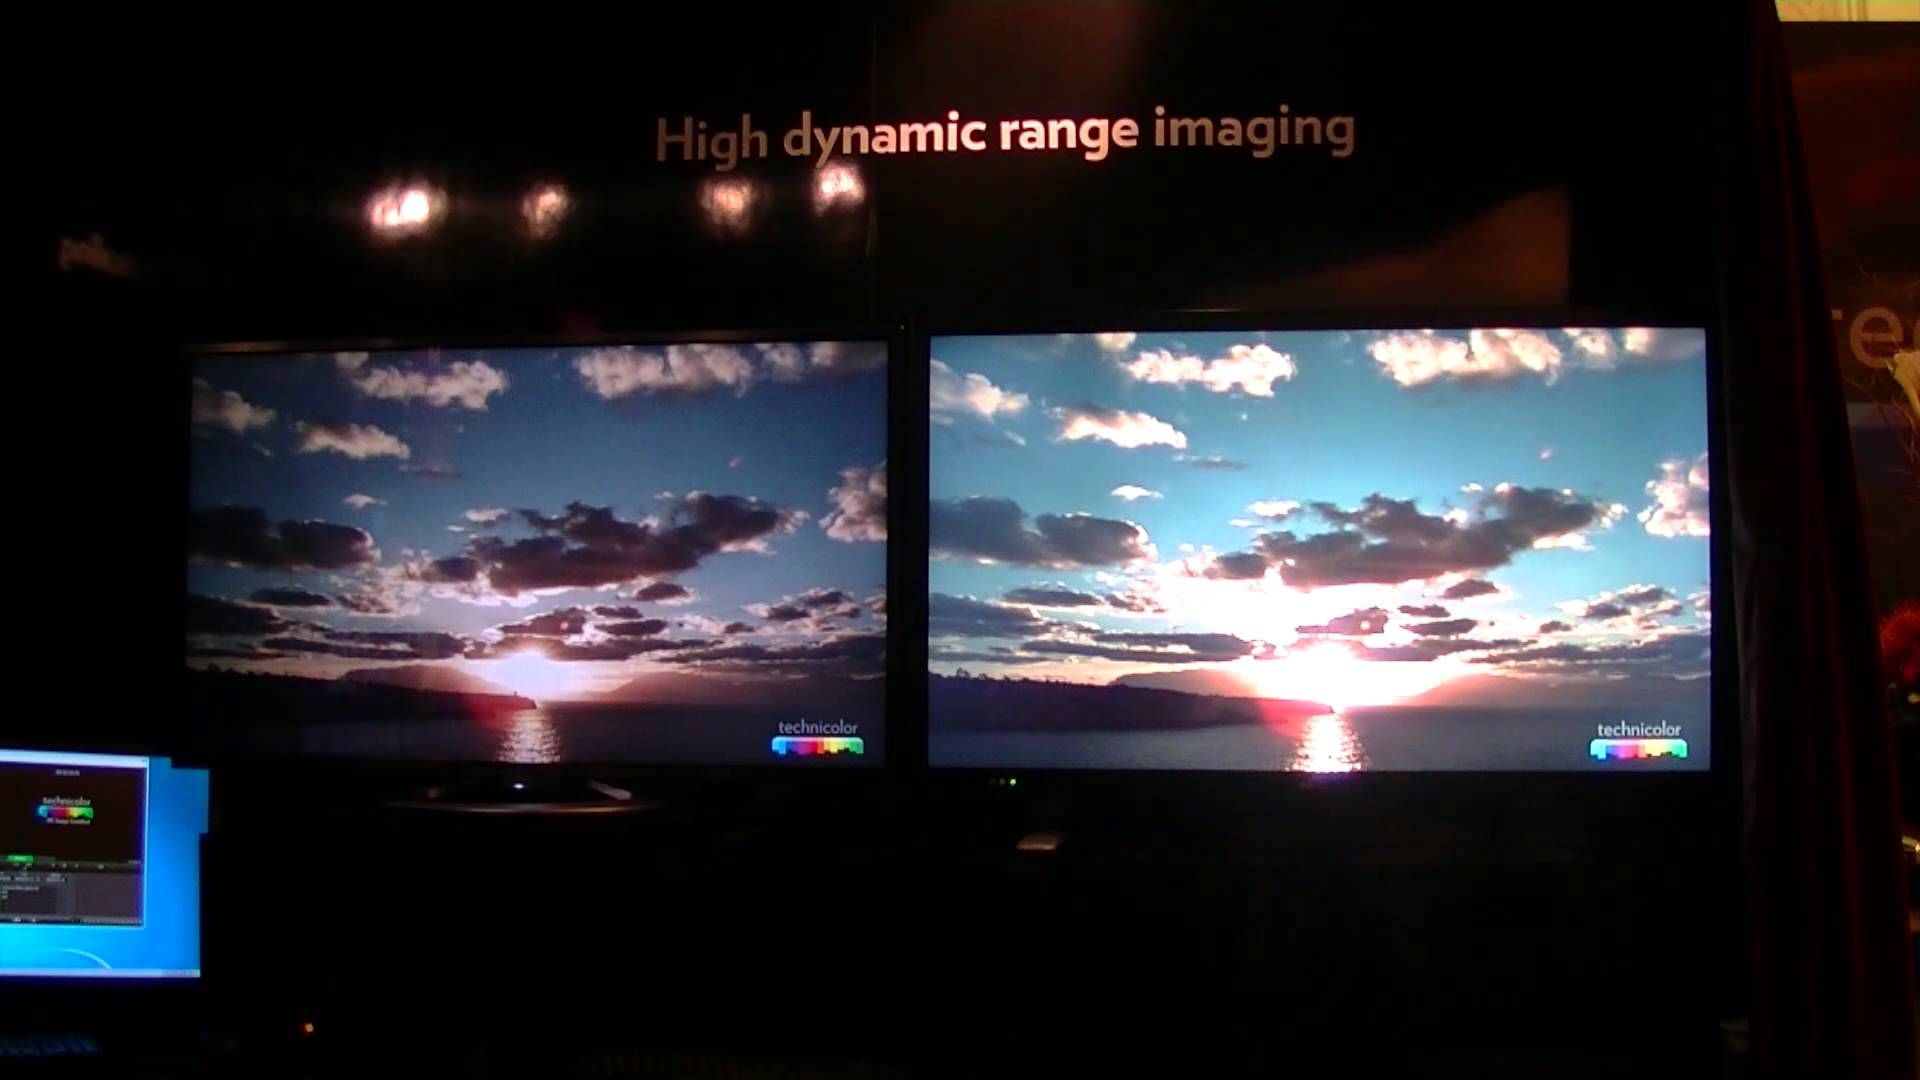 What is HDR?